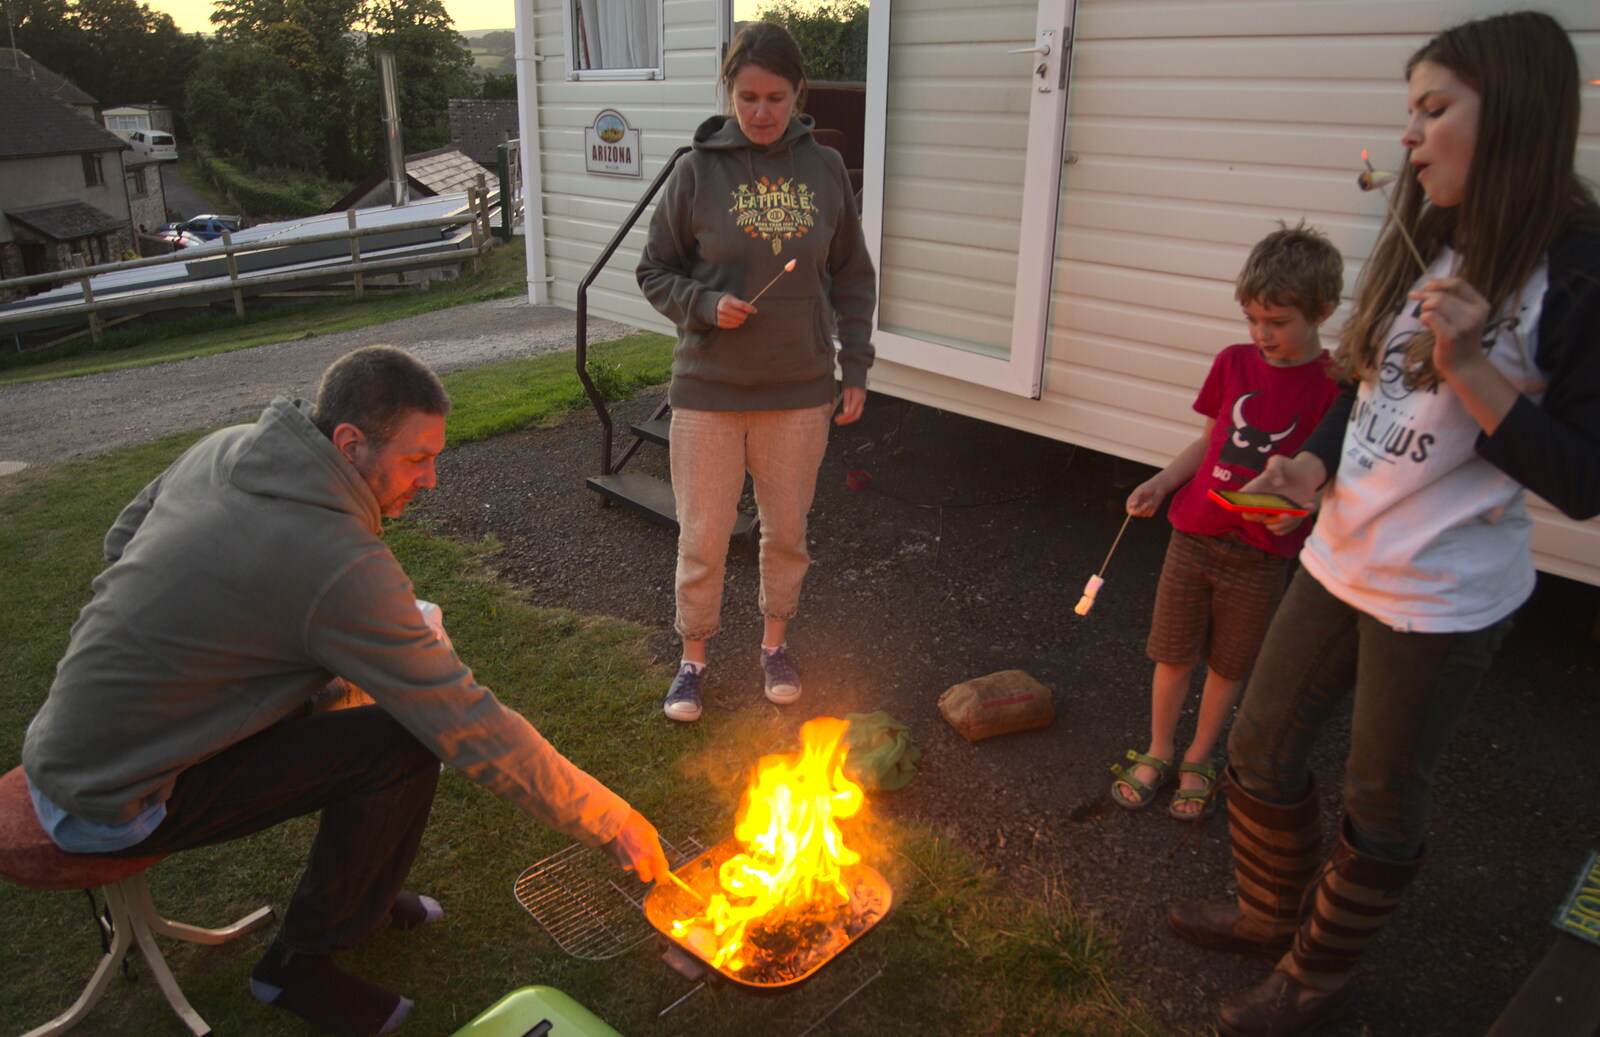 Sean pokes the fire from Camping With Sean, Ashburton, Devon - 8th August 2016